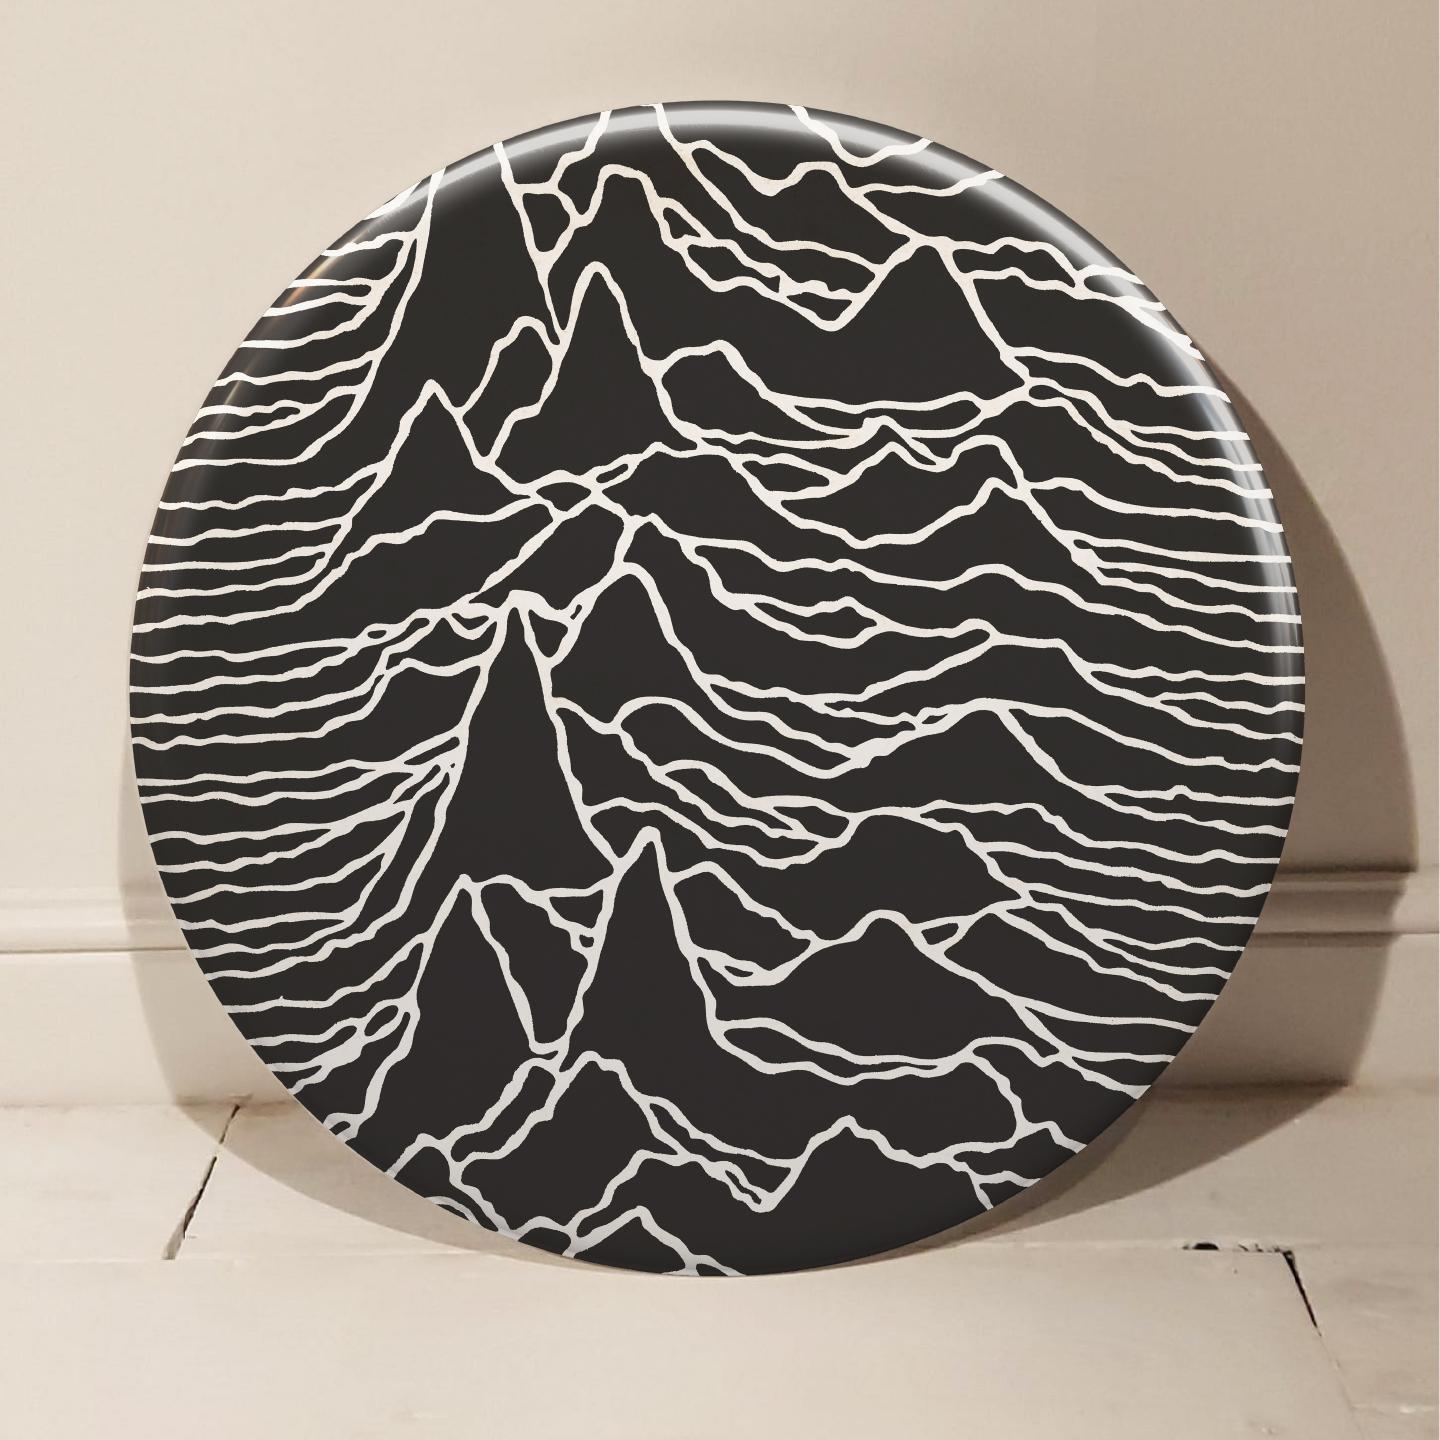 Joy Division "Unknown Pleasures" Giant Handmade 3D Vintage Button - Mixed Media Art by Tony Dennis